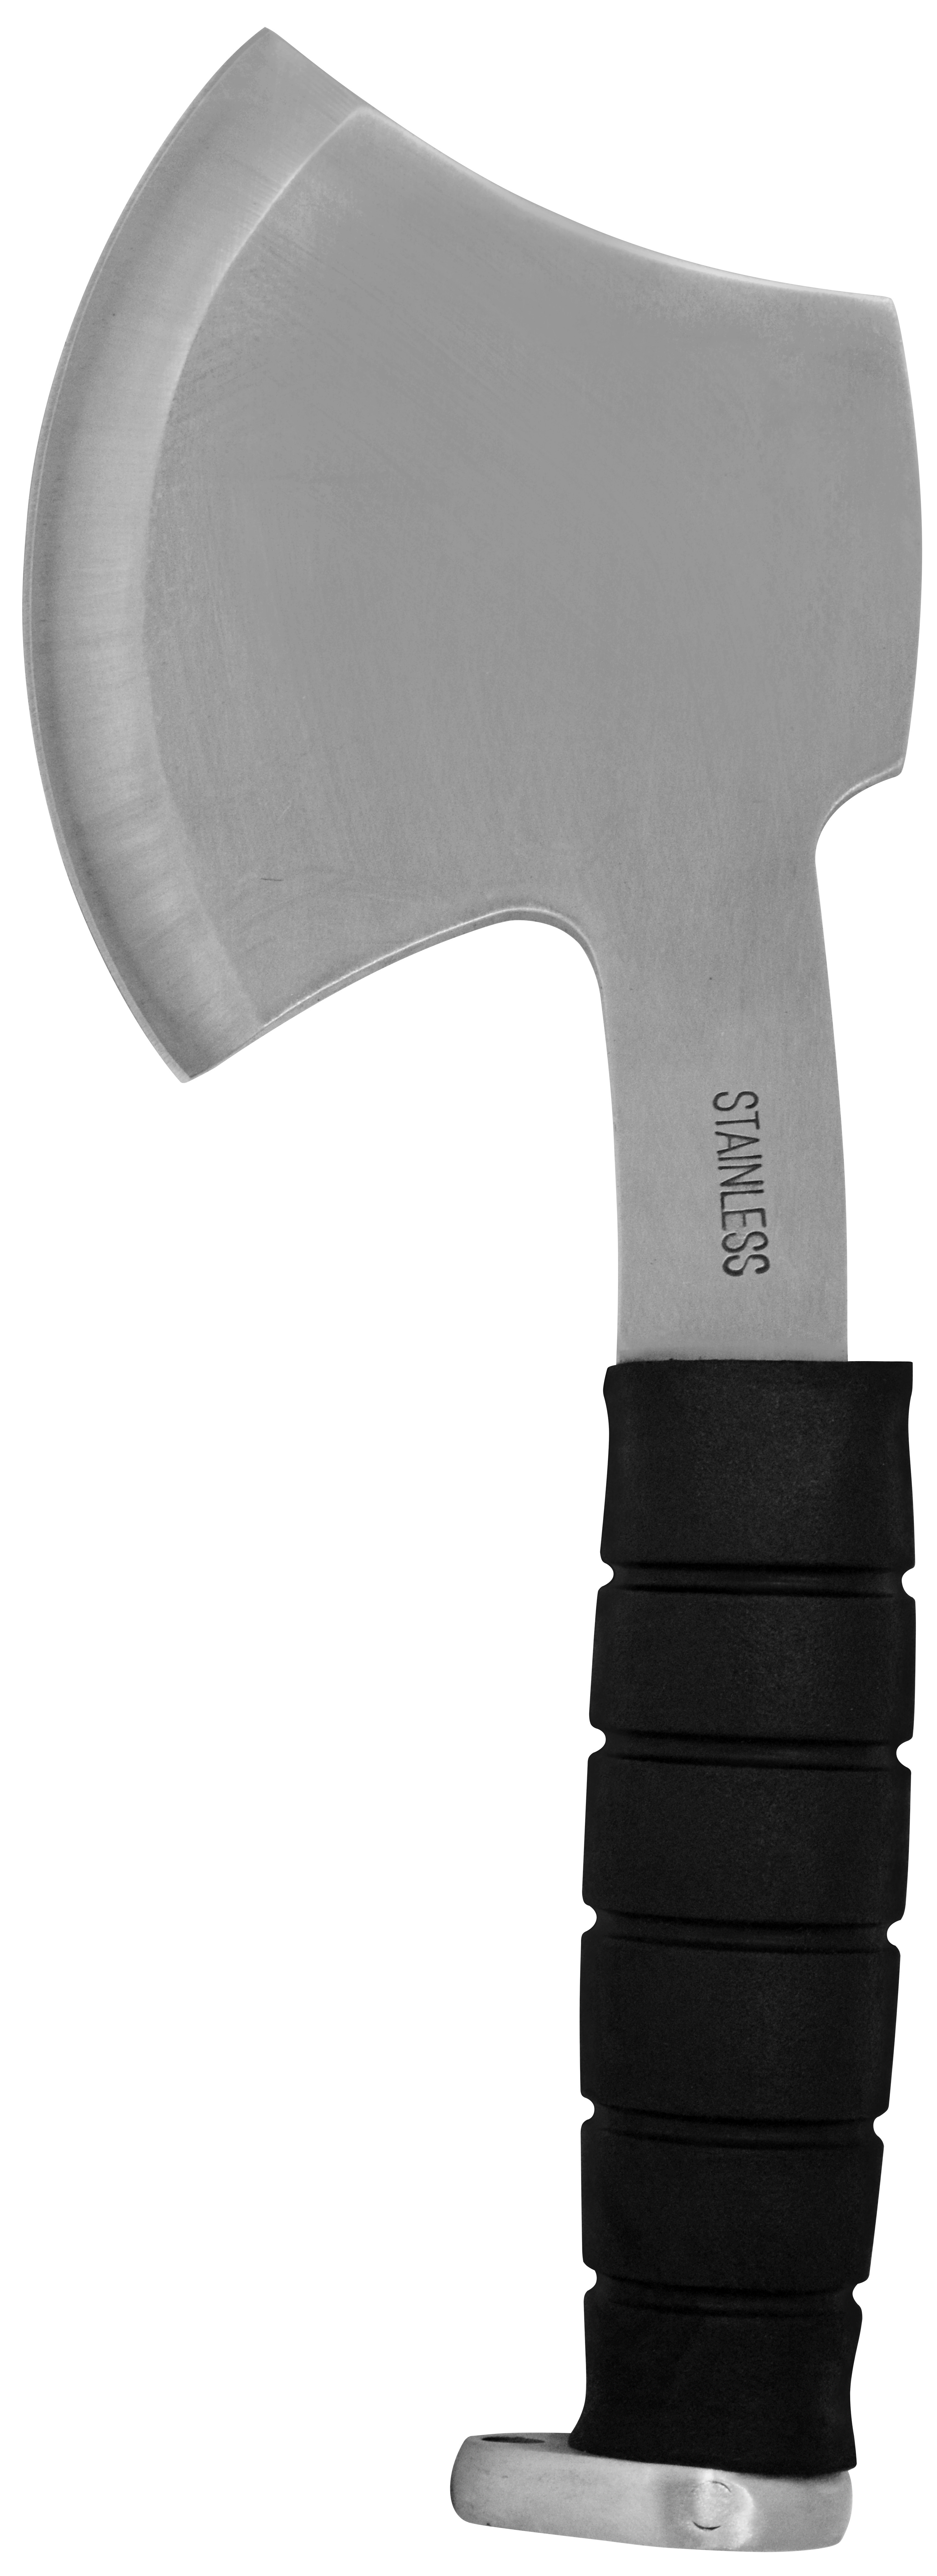 Non-Absorbent Black Plastic Knife Sheath, Stainless Steel Belt Clip Fits  7-3/4 in. x 2-1/8 in. Blade AG4026 - The Home Depot